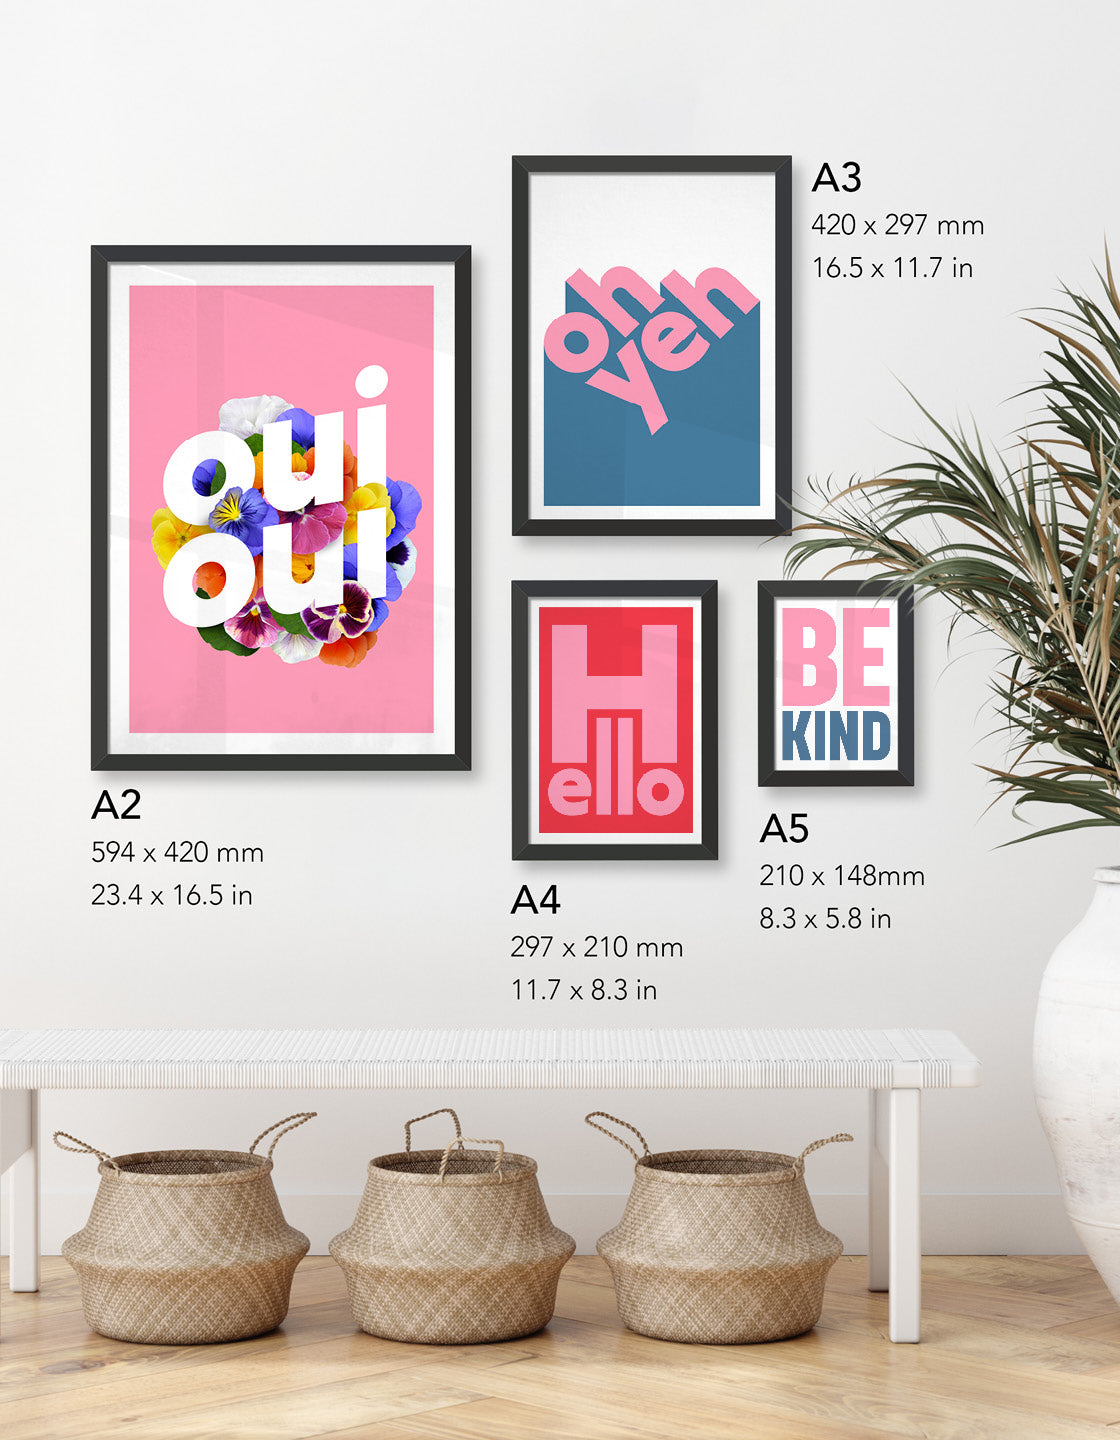 image depicting four different size prints available in the poo and Oui Oui collection; A5, A4, A3 and A2